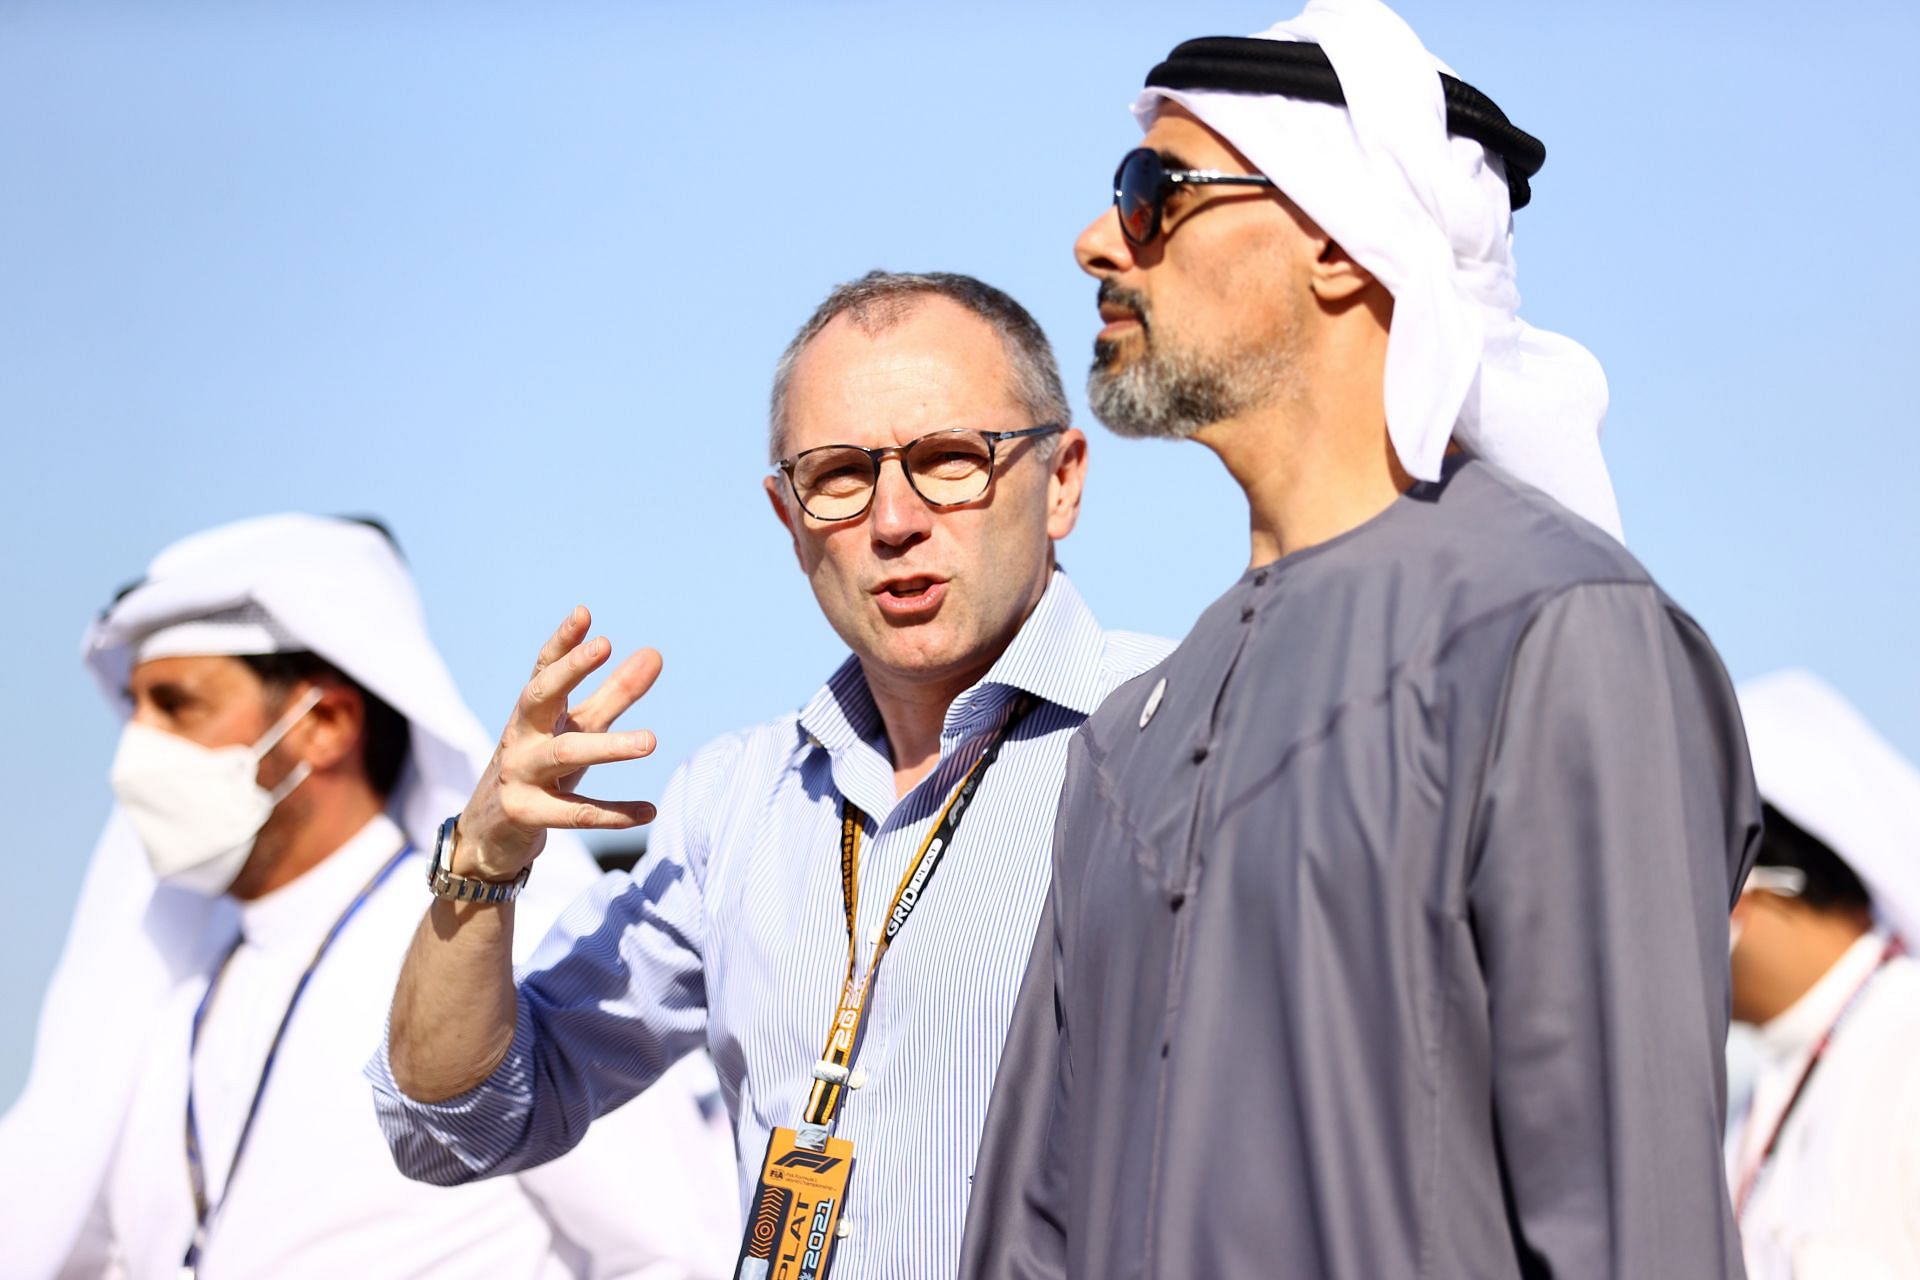 Stefano Domenicali, CEO of the Formula One Group, talks with Abu Dhabi GP promoters during previews ahead of the F1 race (Photo by Bryn Lennon/Getty Images)